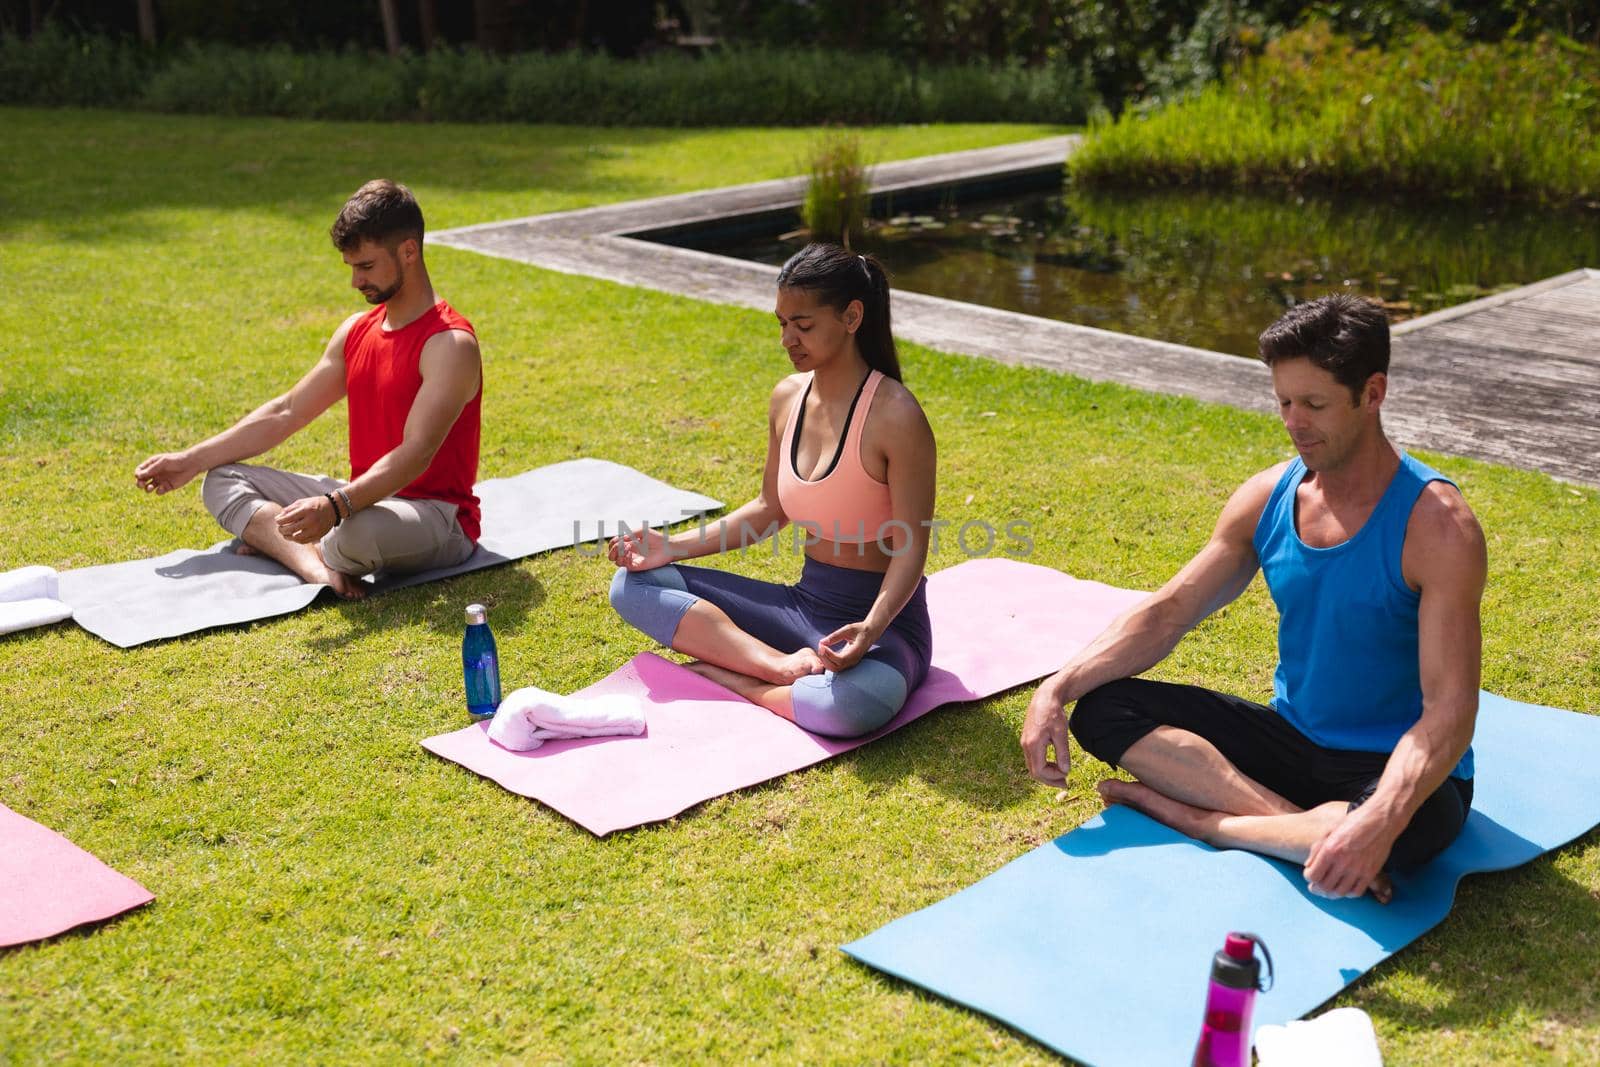 Men and woman in sportswear meditating on exercise mats in park. yoga, healthy lifestyle and body care.